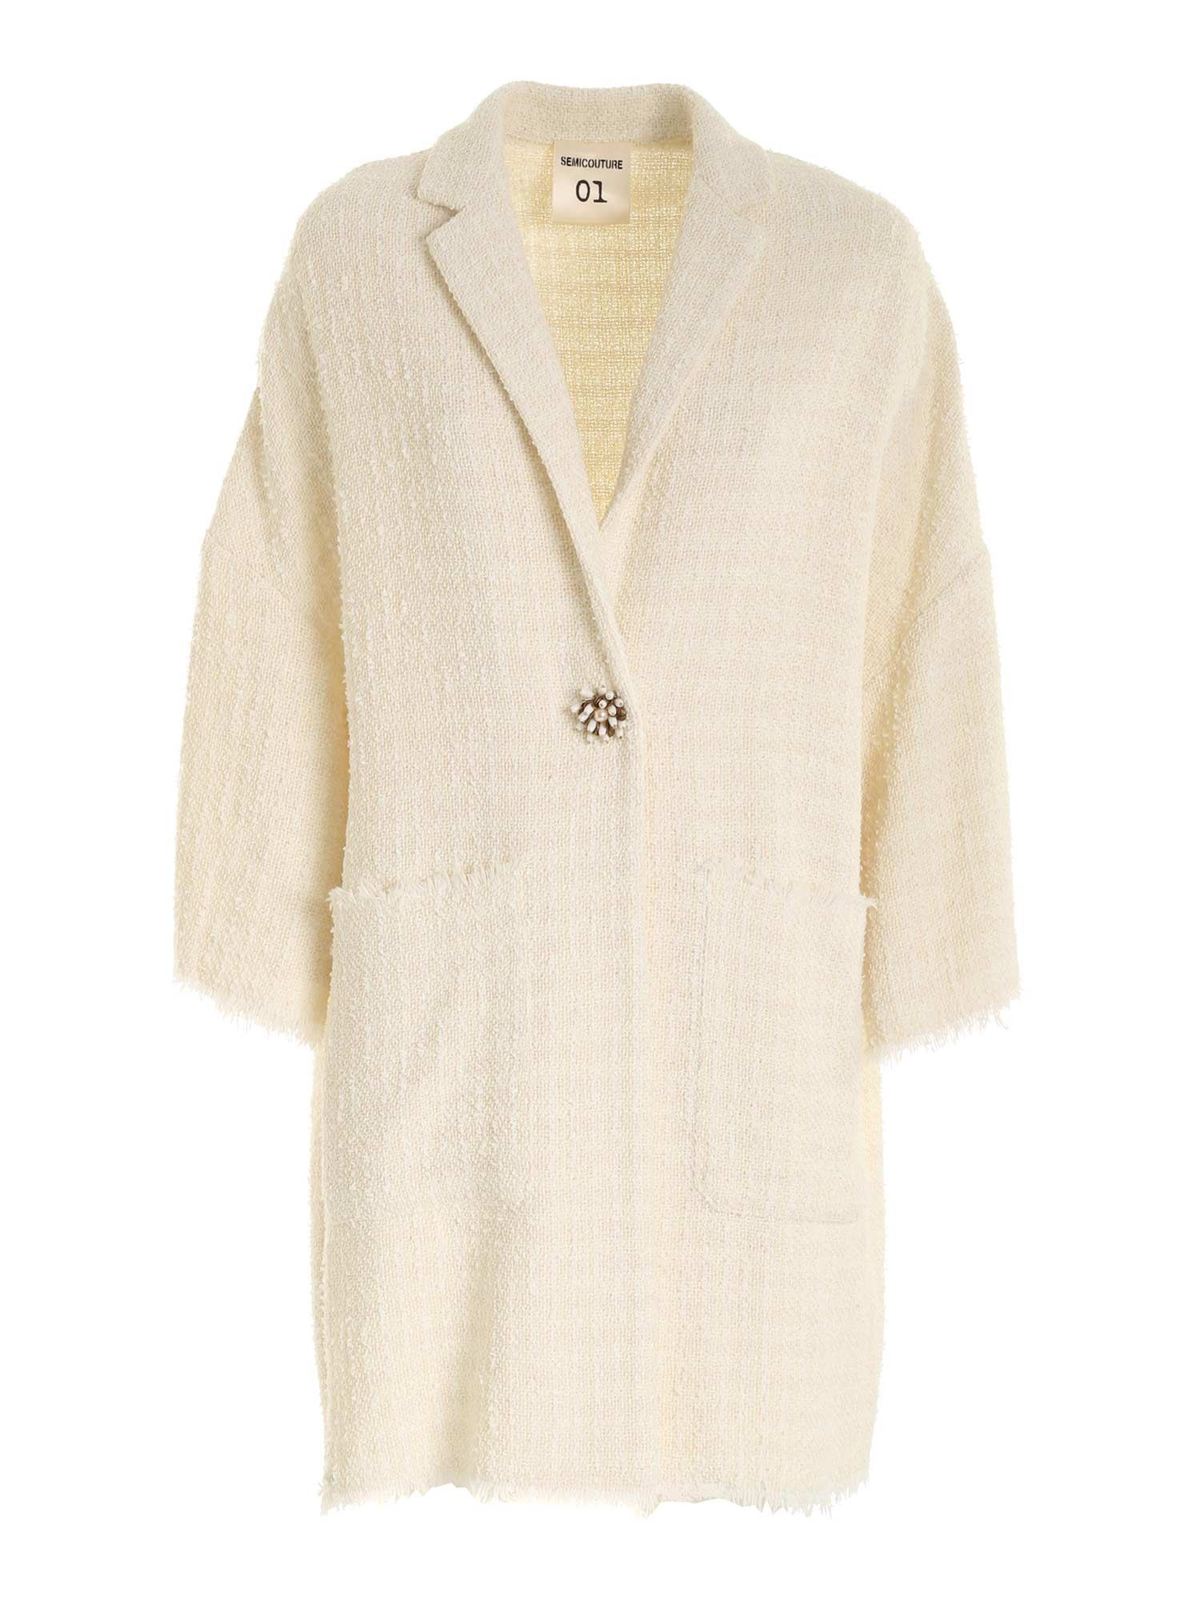 SEMICOUTURE SIGMUND COAT IN IVORY COLOR